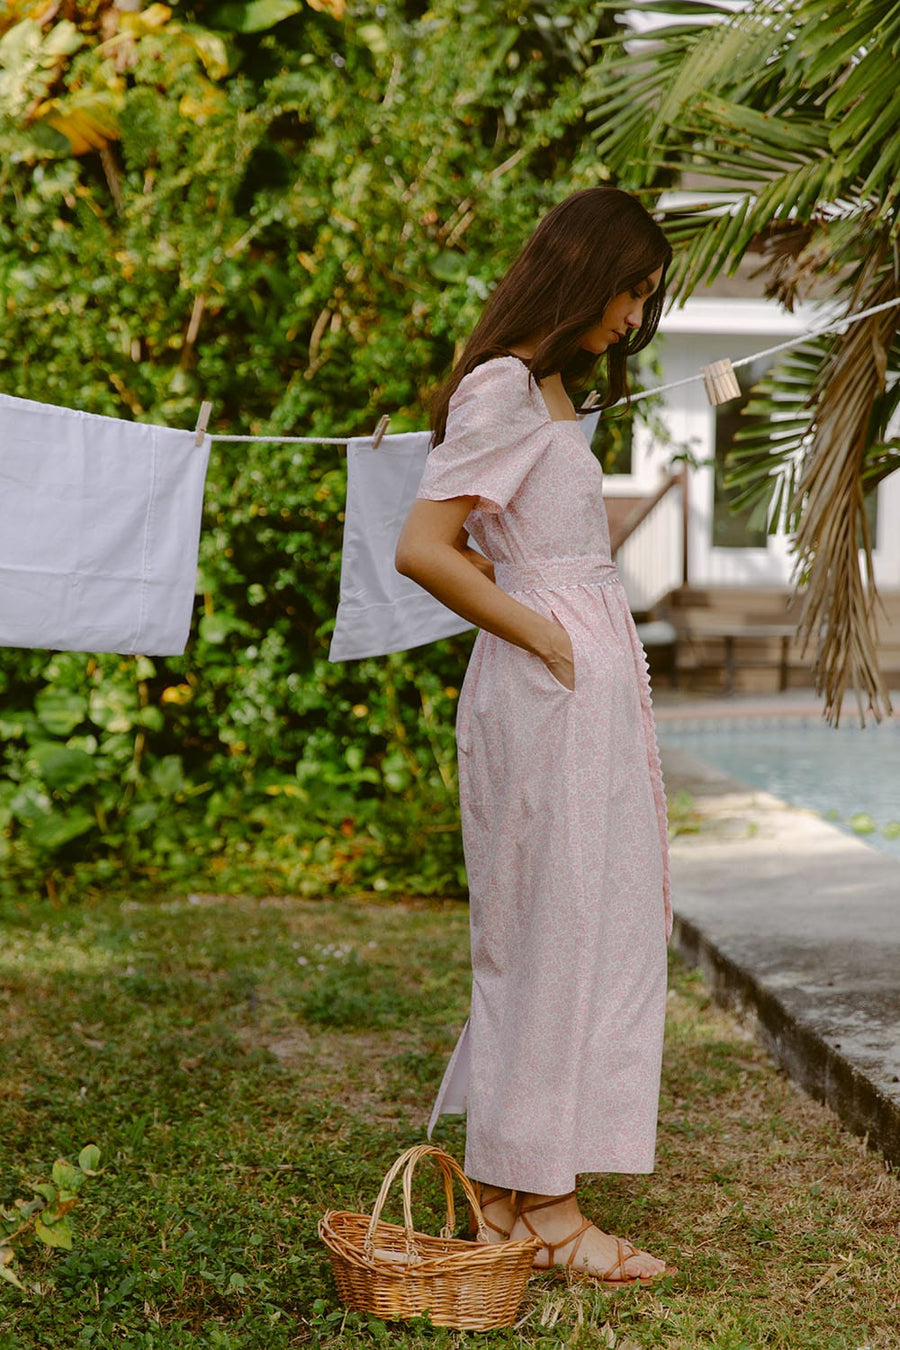 Woman wearing pink sundress by a laundry line